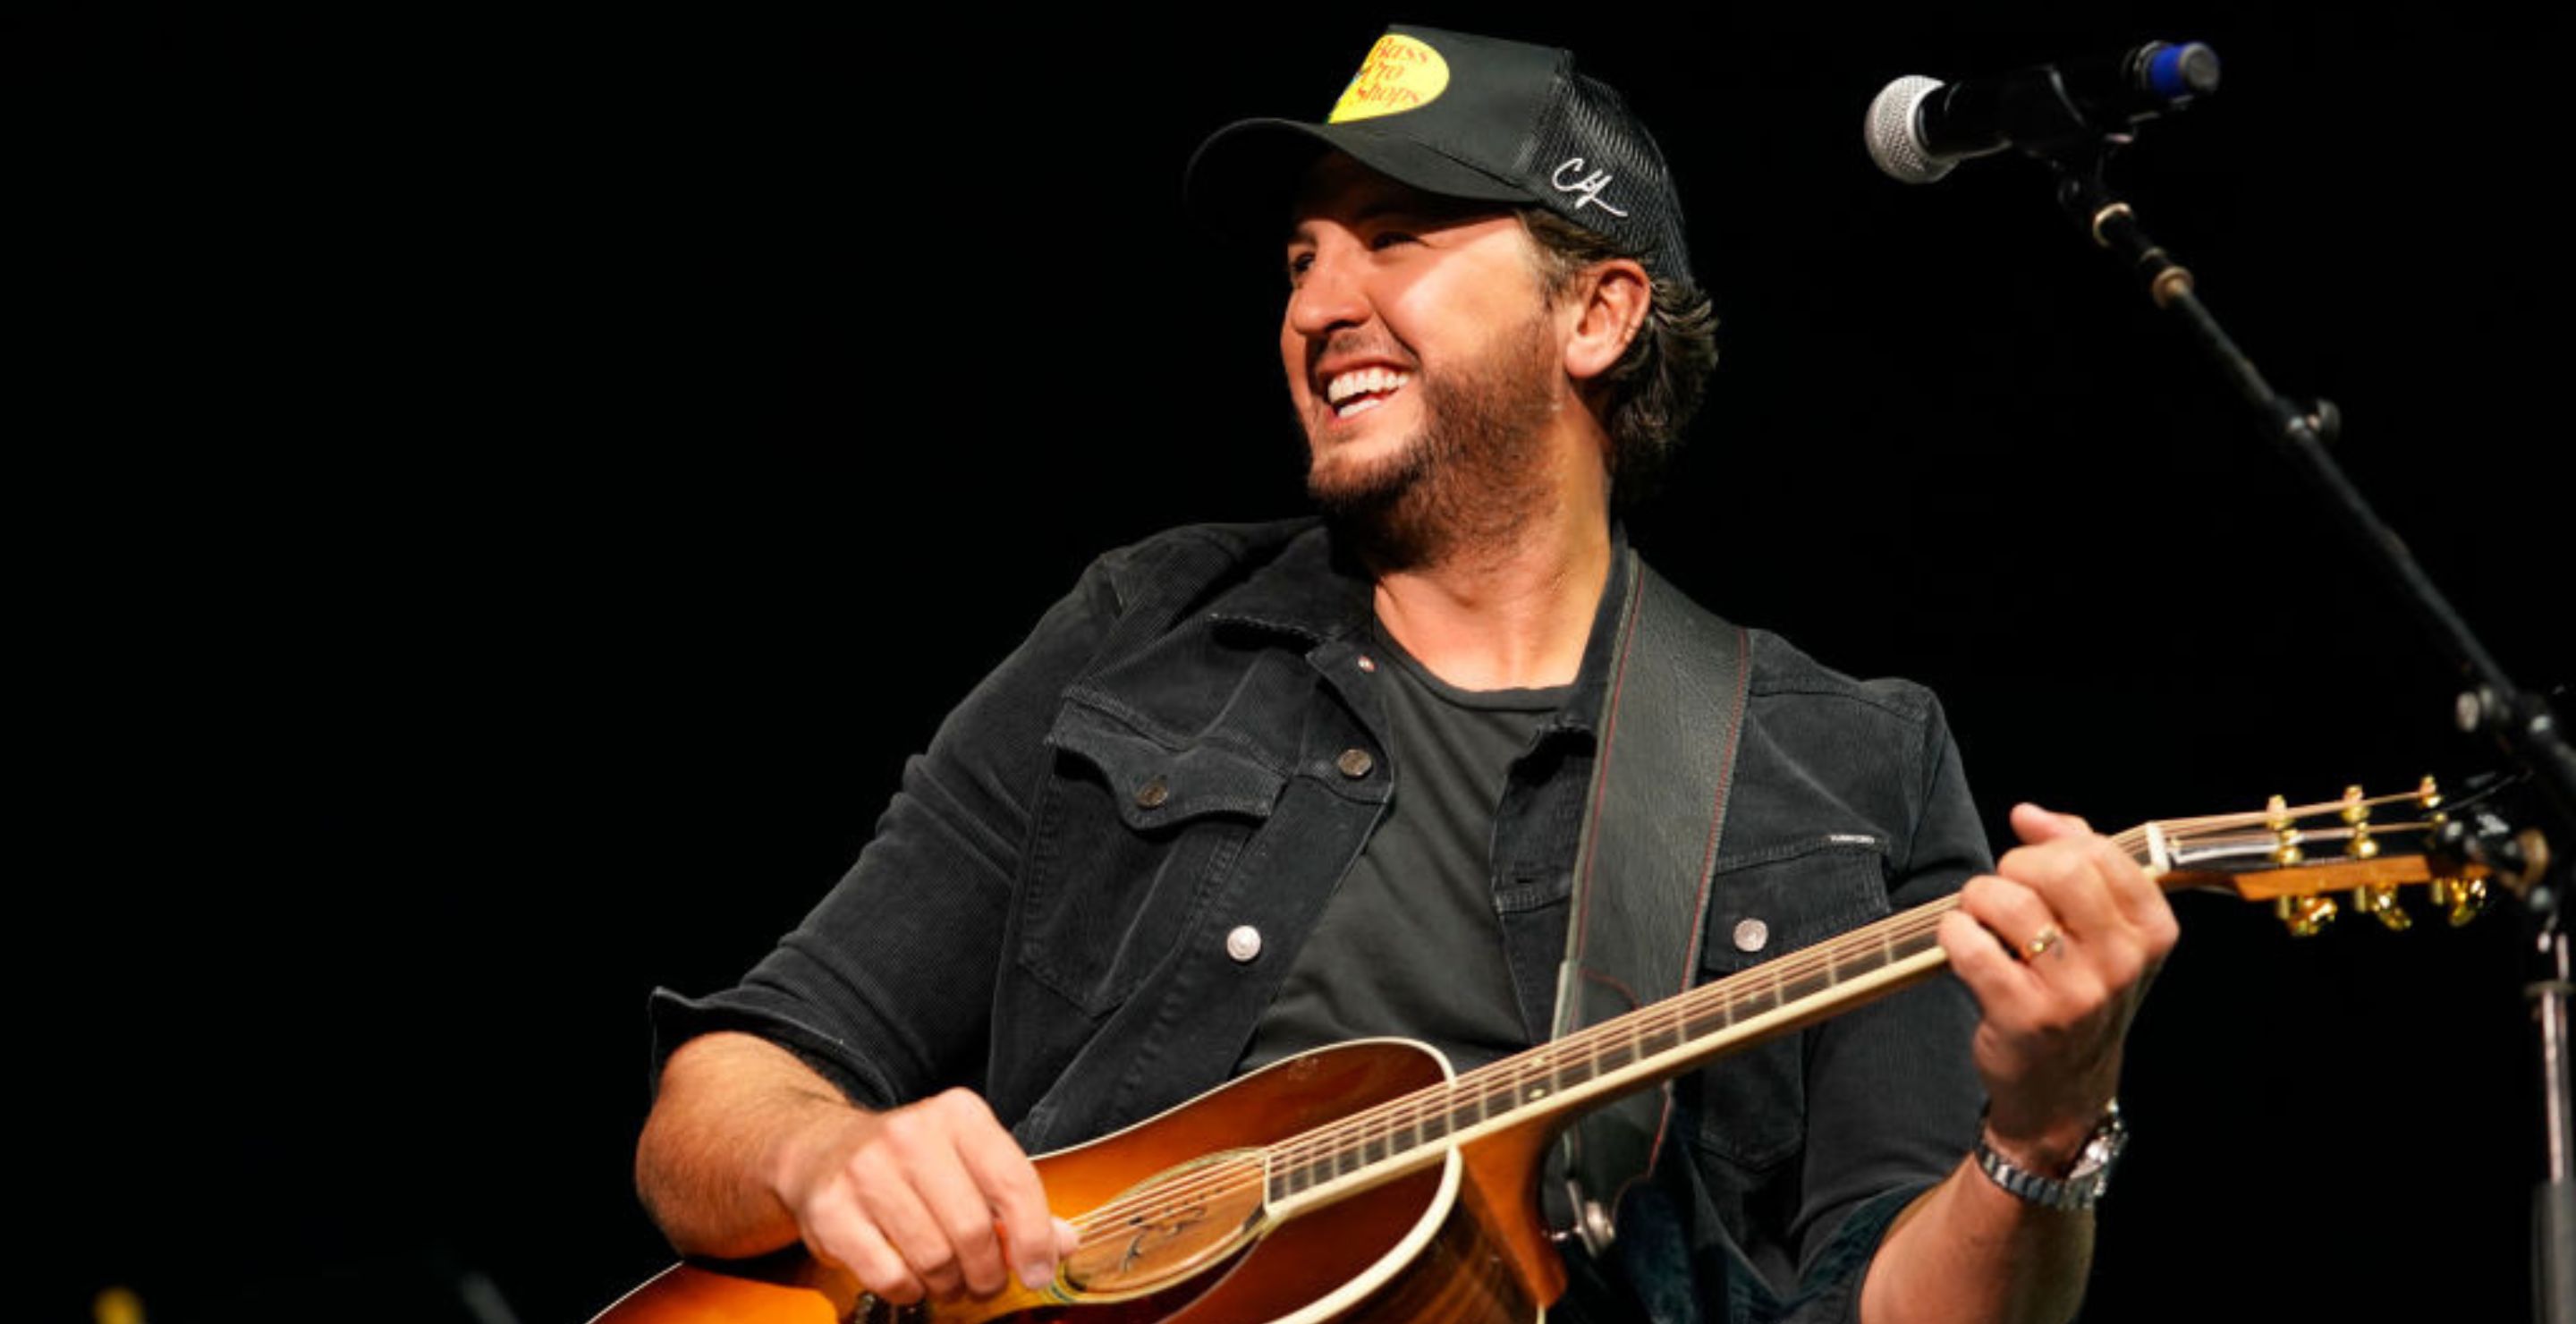 Luke Bryan's Going Fishing With One Of His 'American Idol' Finalists